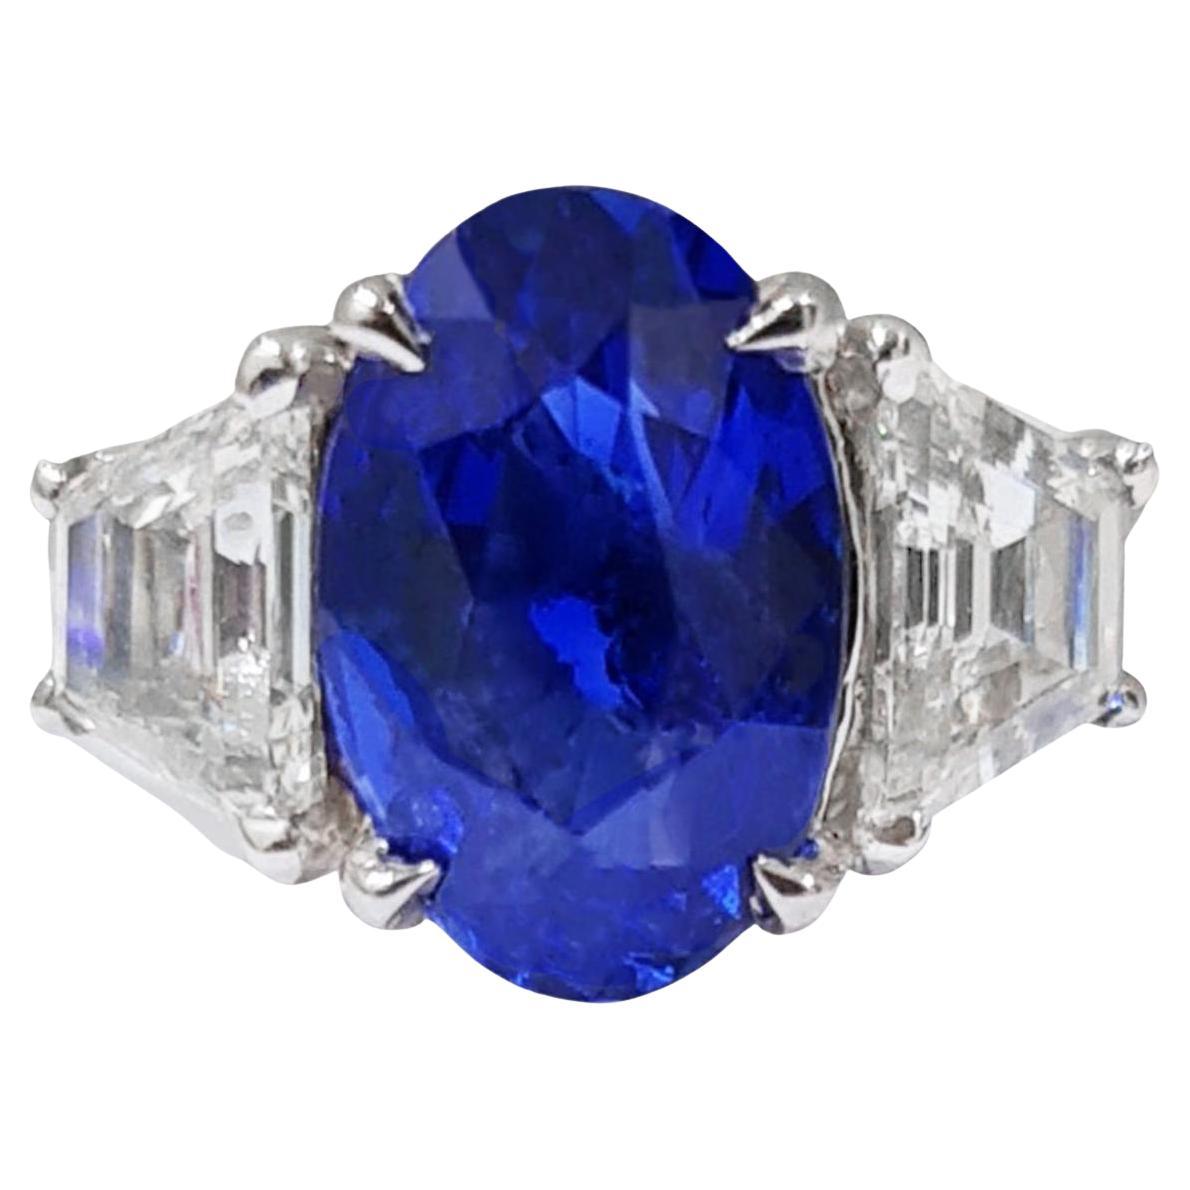 It comes with the appraisal by GIA GG/AJP
Blue Sapphire = 2.03 Carat
Cut: Oval
2 Diamonds = 0.62 Carats
( Color: G-H, Clarity: SI )
Metal: 18K White Gold
Ring Size: 7* US
*It can be resized complimentary